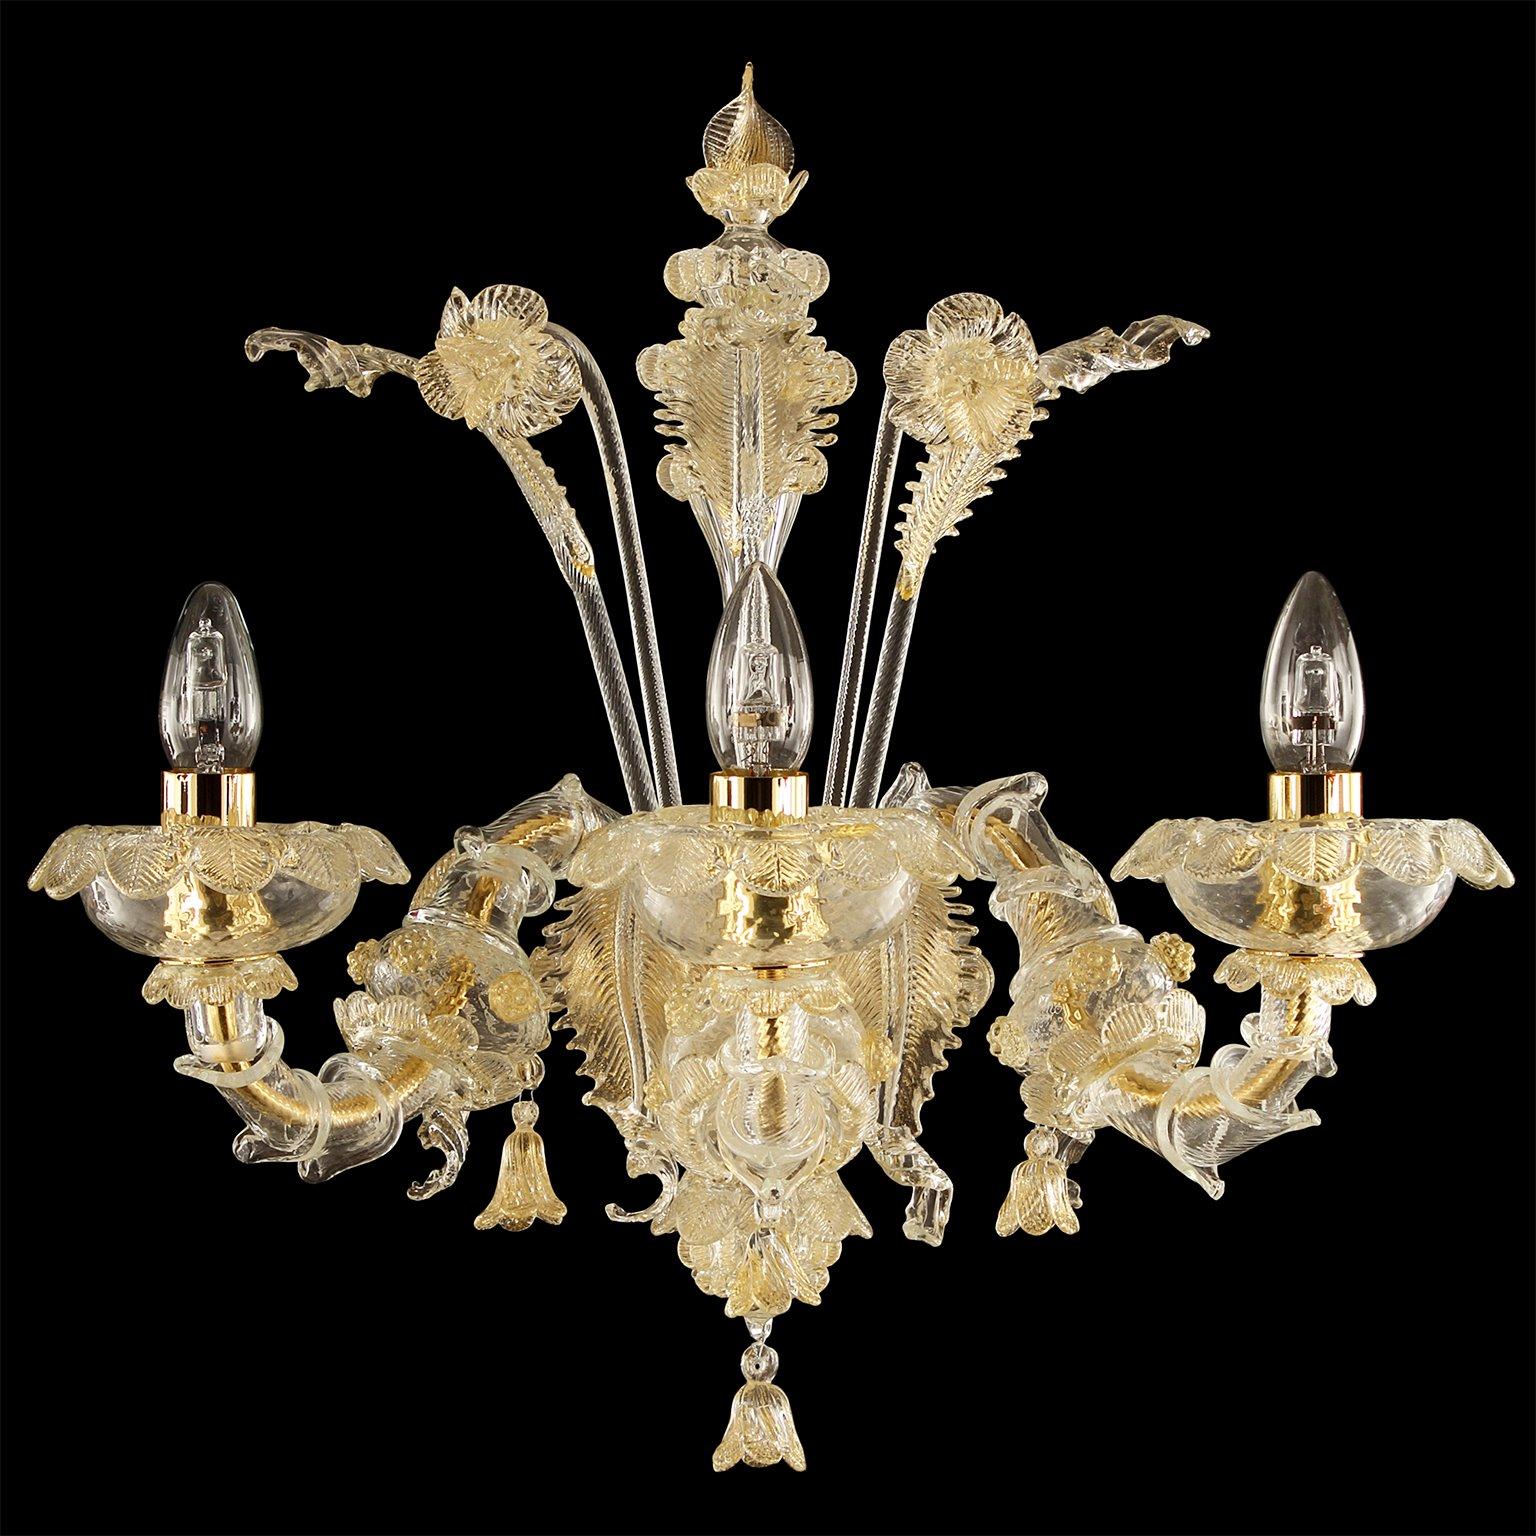 Caesar wall 3 lights, Venetian style, clear blown artistic glass and gold details by Multiforme
The name, as well as the structure evokes the splendour of the past centuries. It is an evergreen model, a classic product manufactured by our skilled